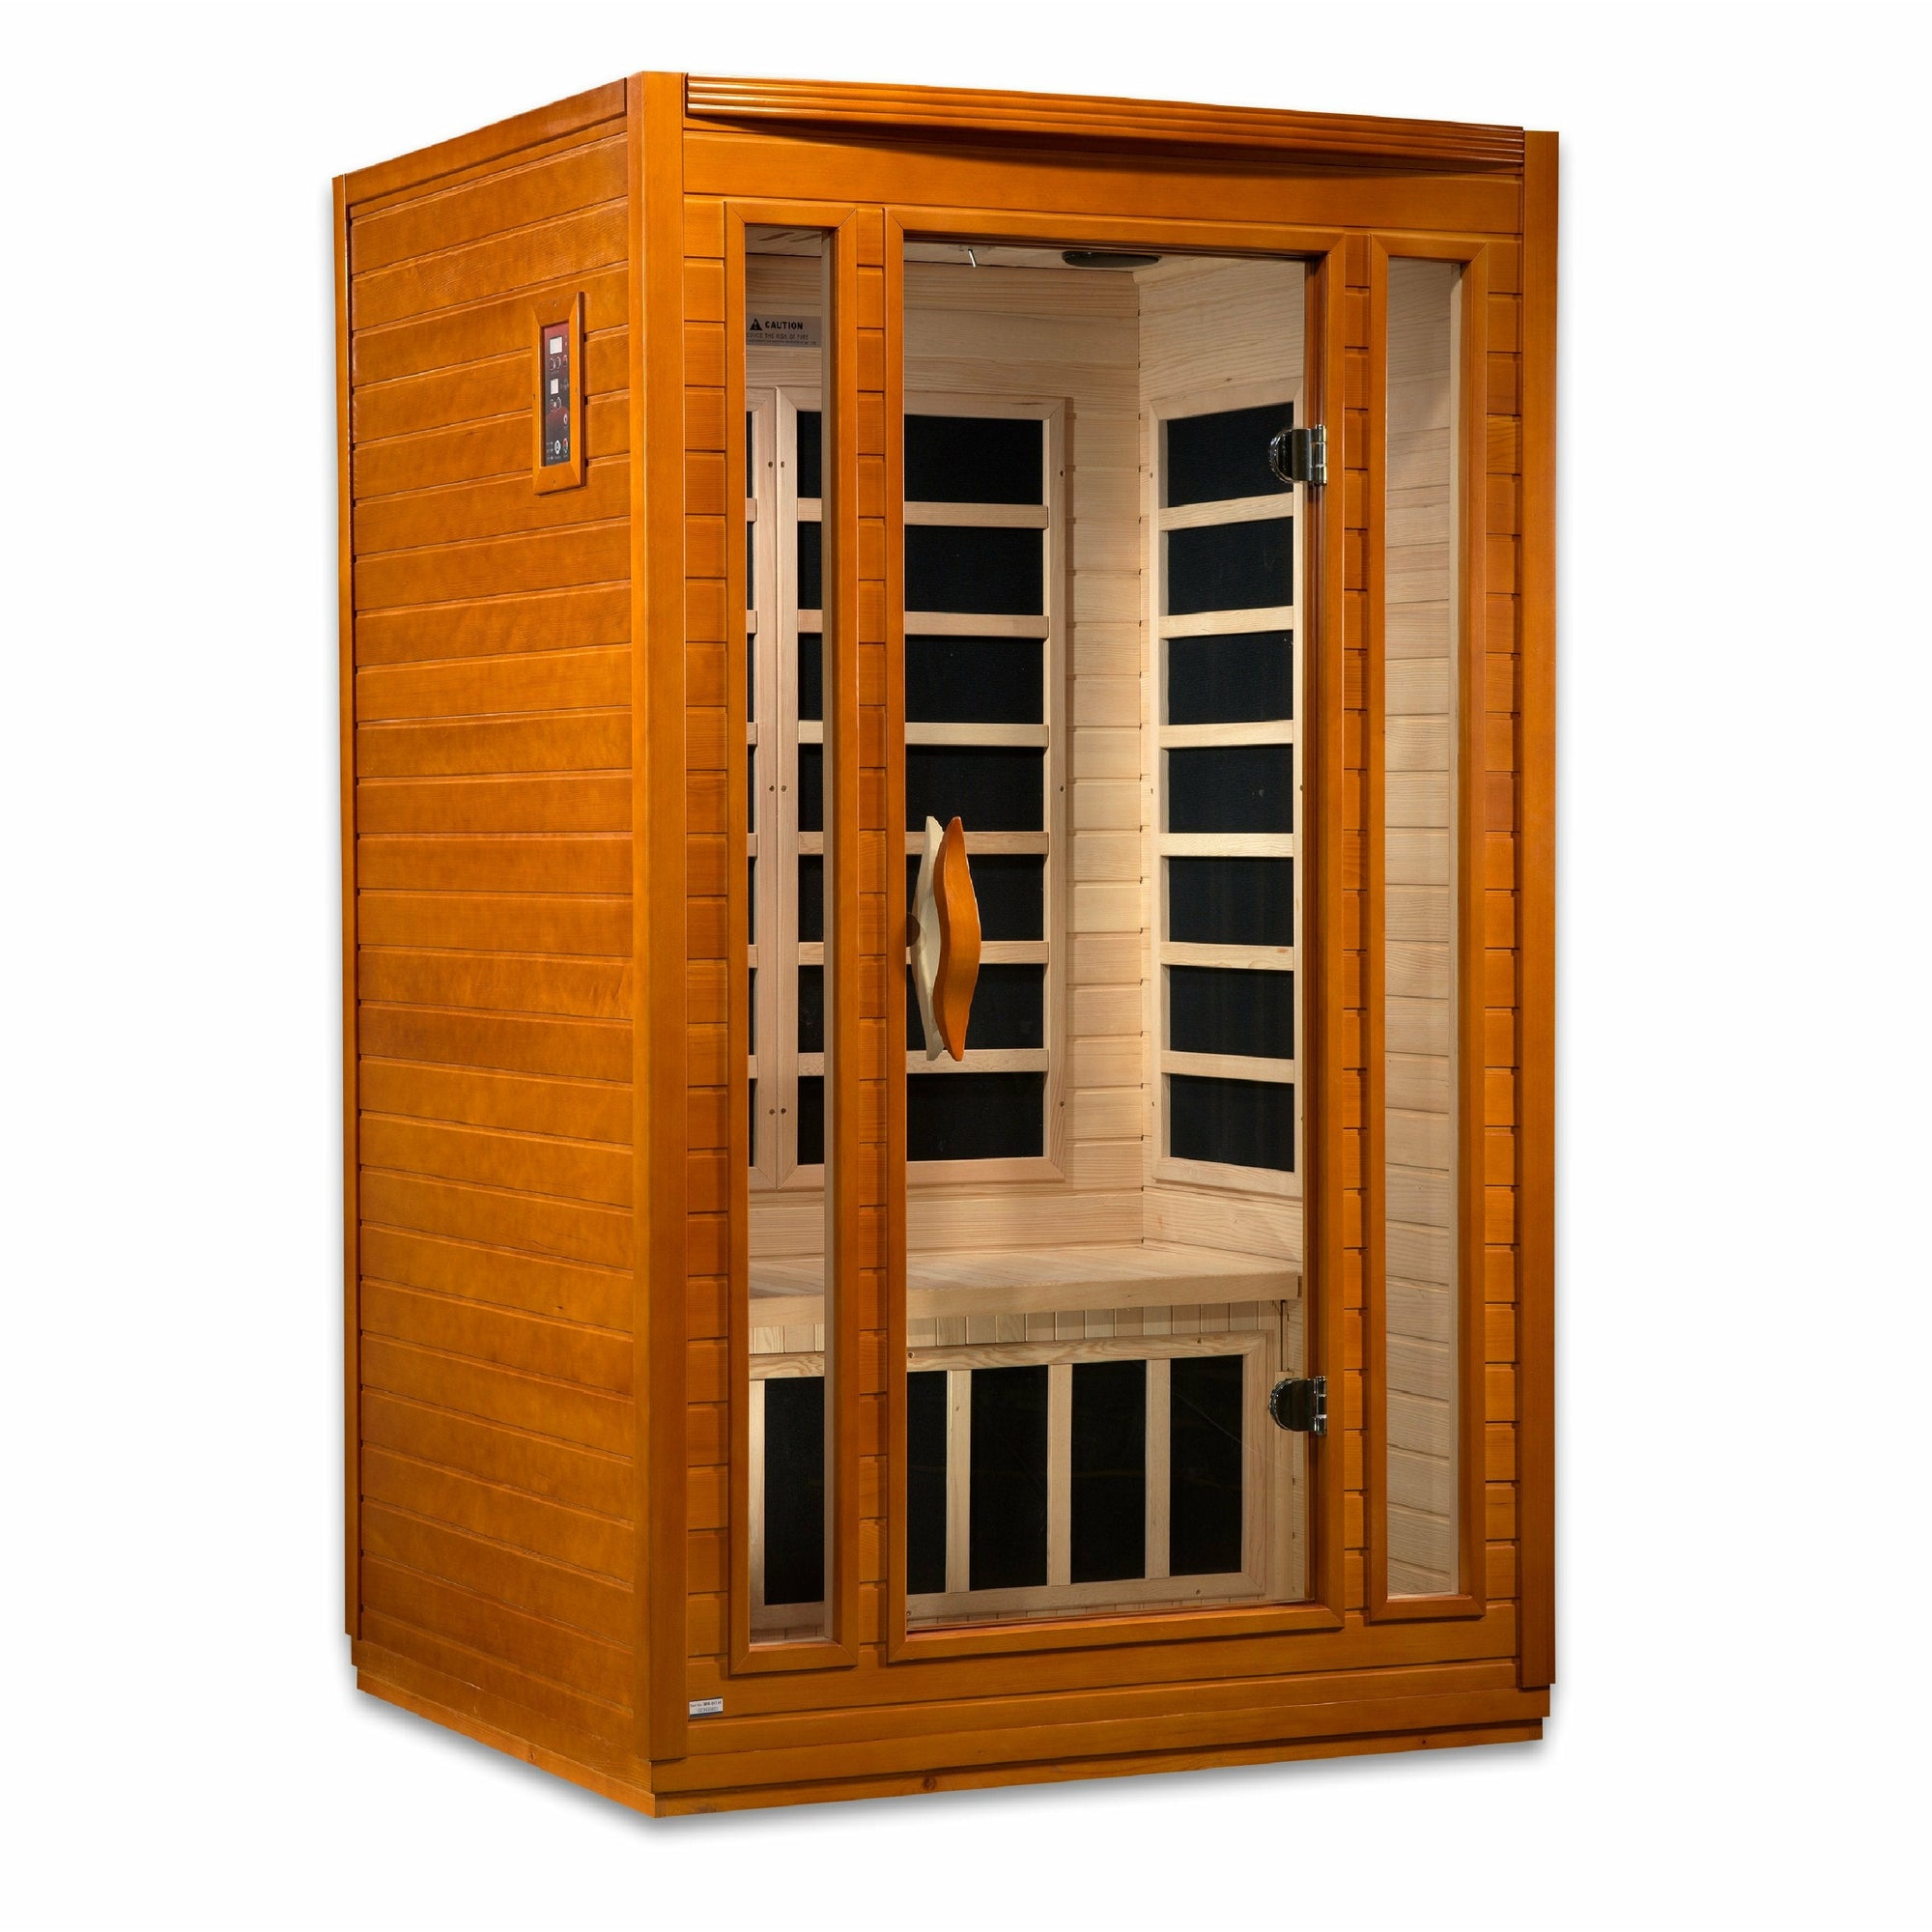 Dynamic San Marino Edition Low EMF Far Infrared Sauna - 2 Person Natural hemlock wood construction Roof vent with Tempered glass door and exterior LED control panel isometric view in white background  - Vital Hydrotherapy